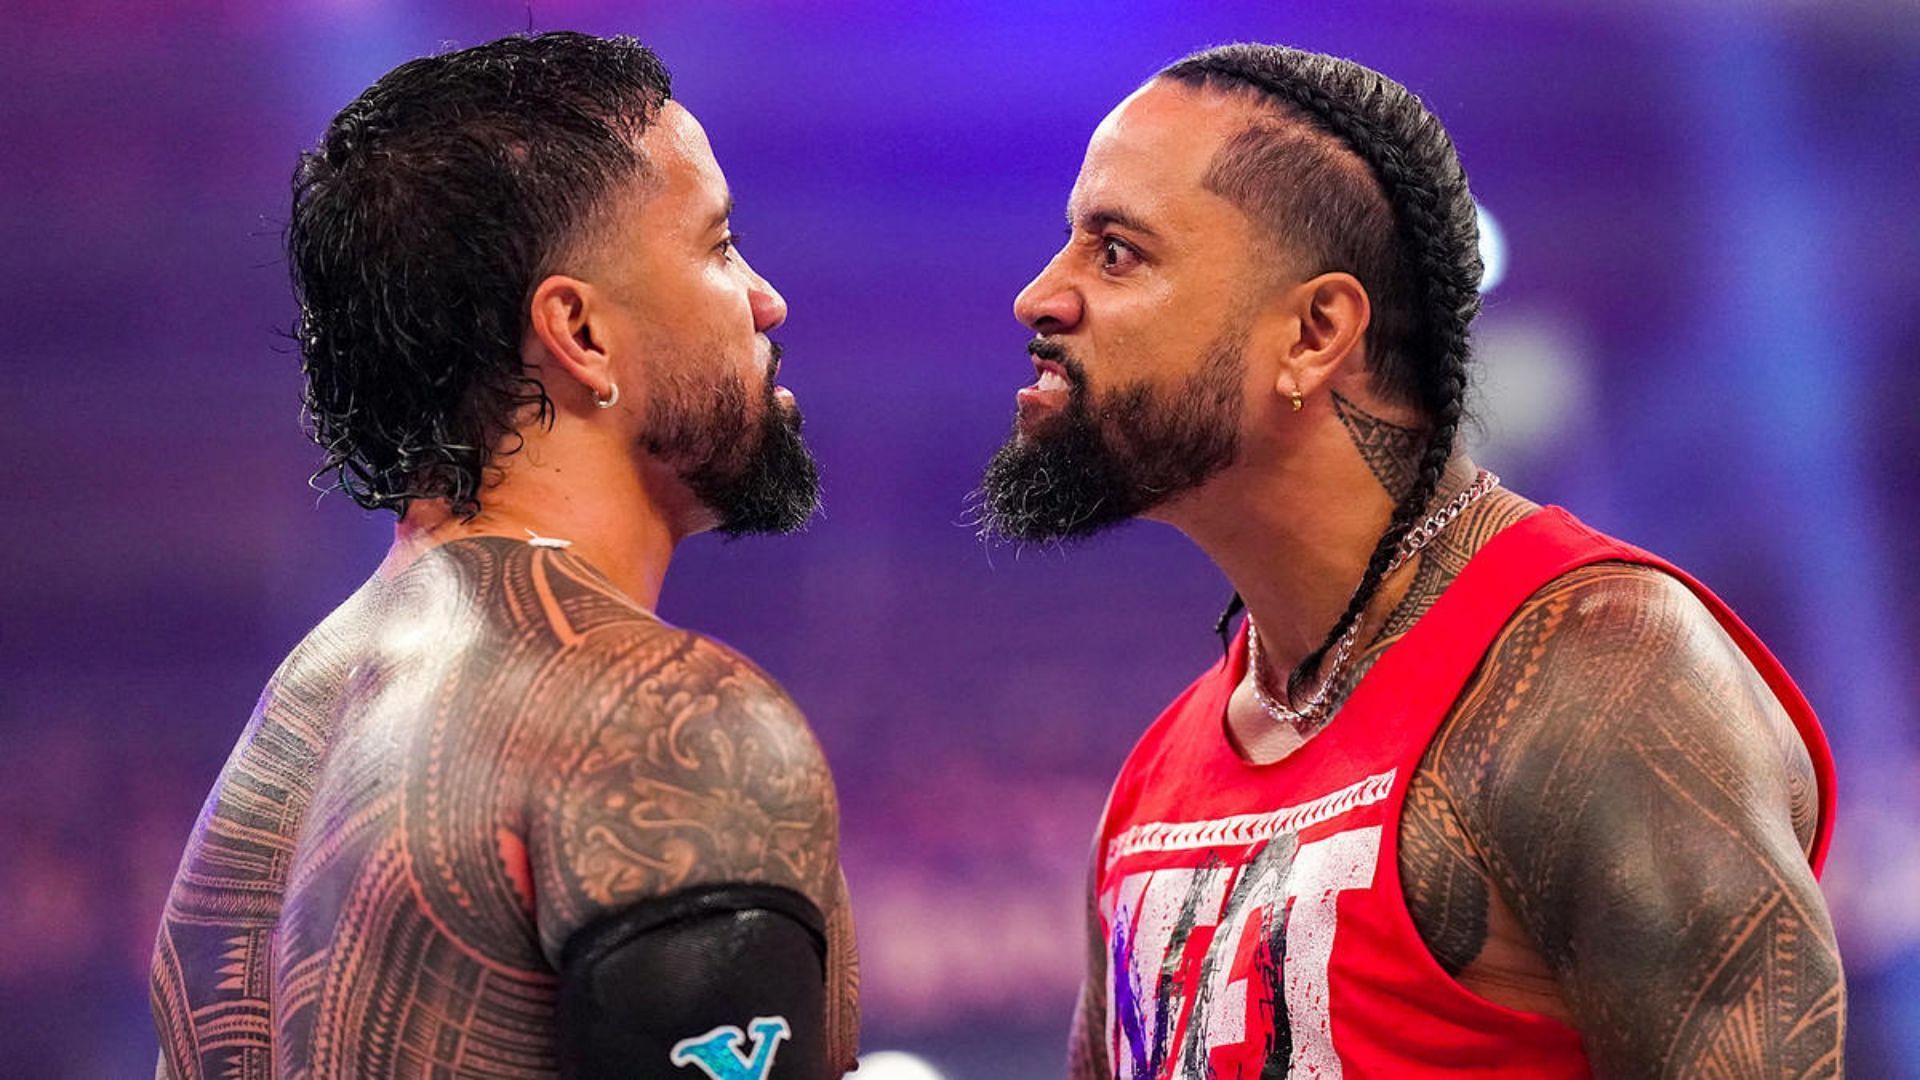 The Usos featured as the first two entrants in the Men